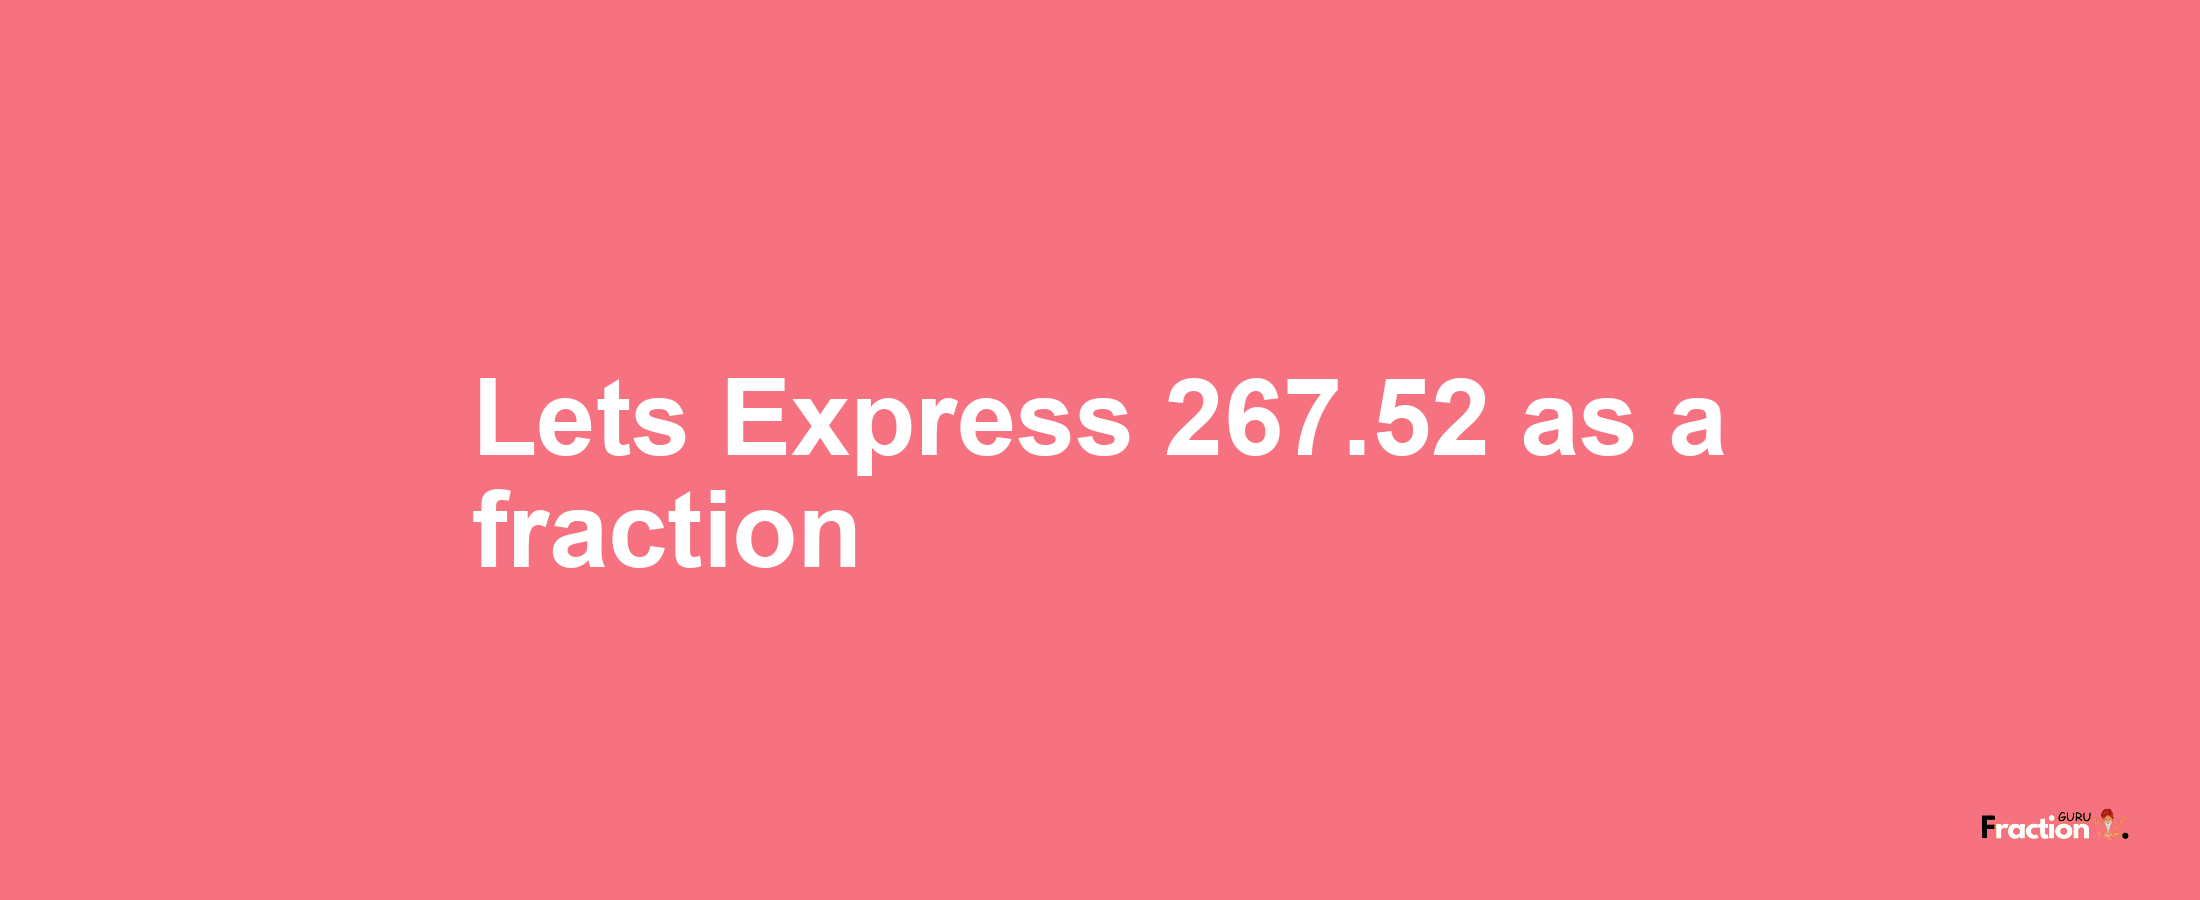 Lets Express 267.52 as afraction